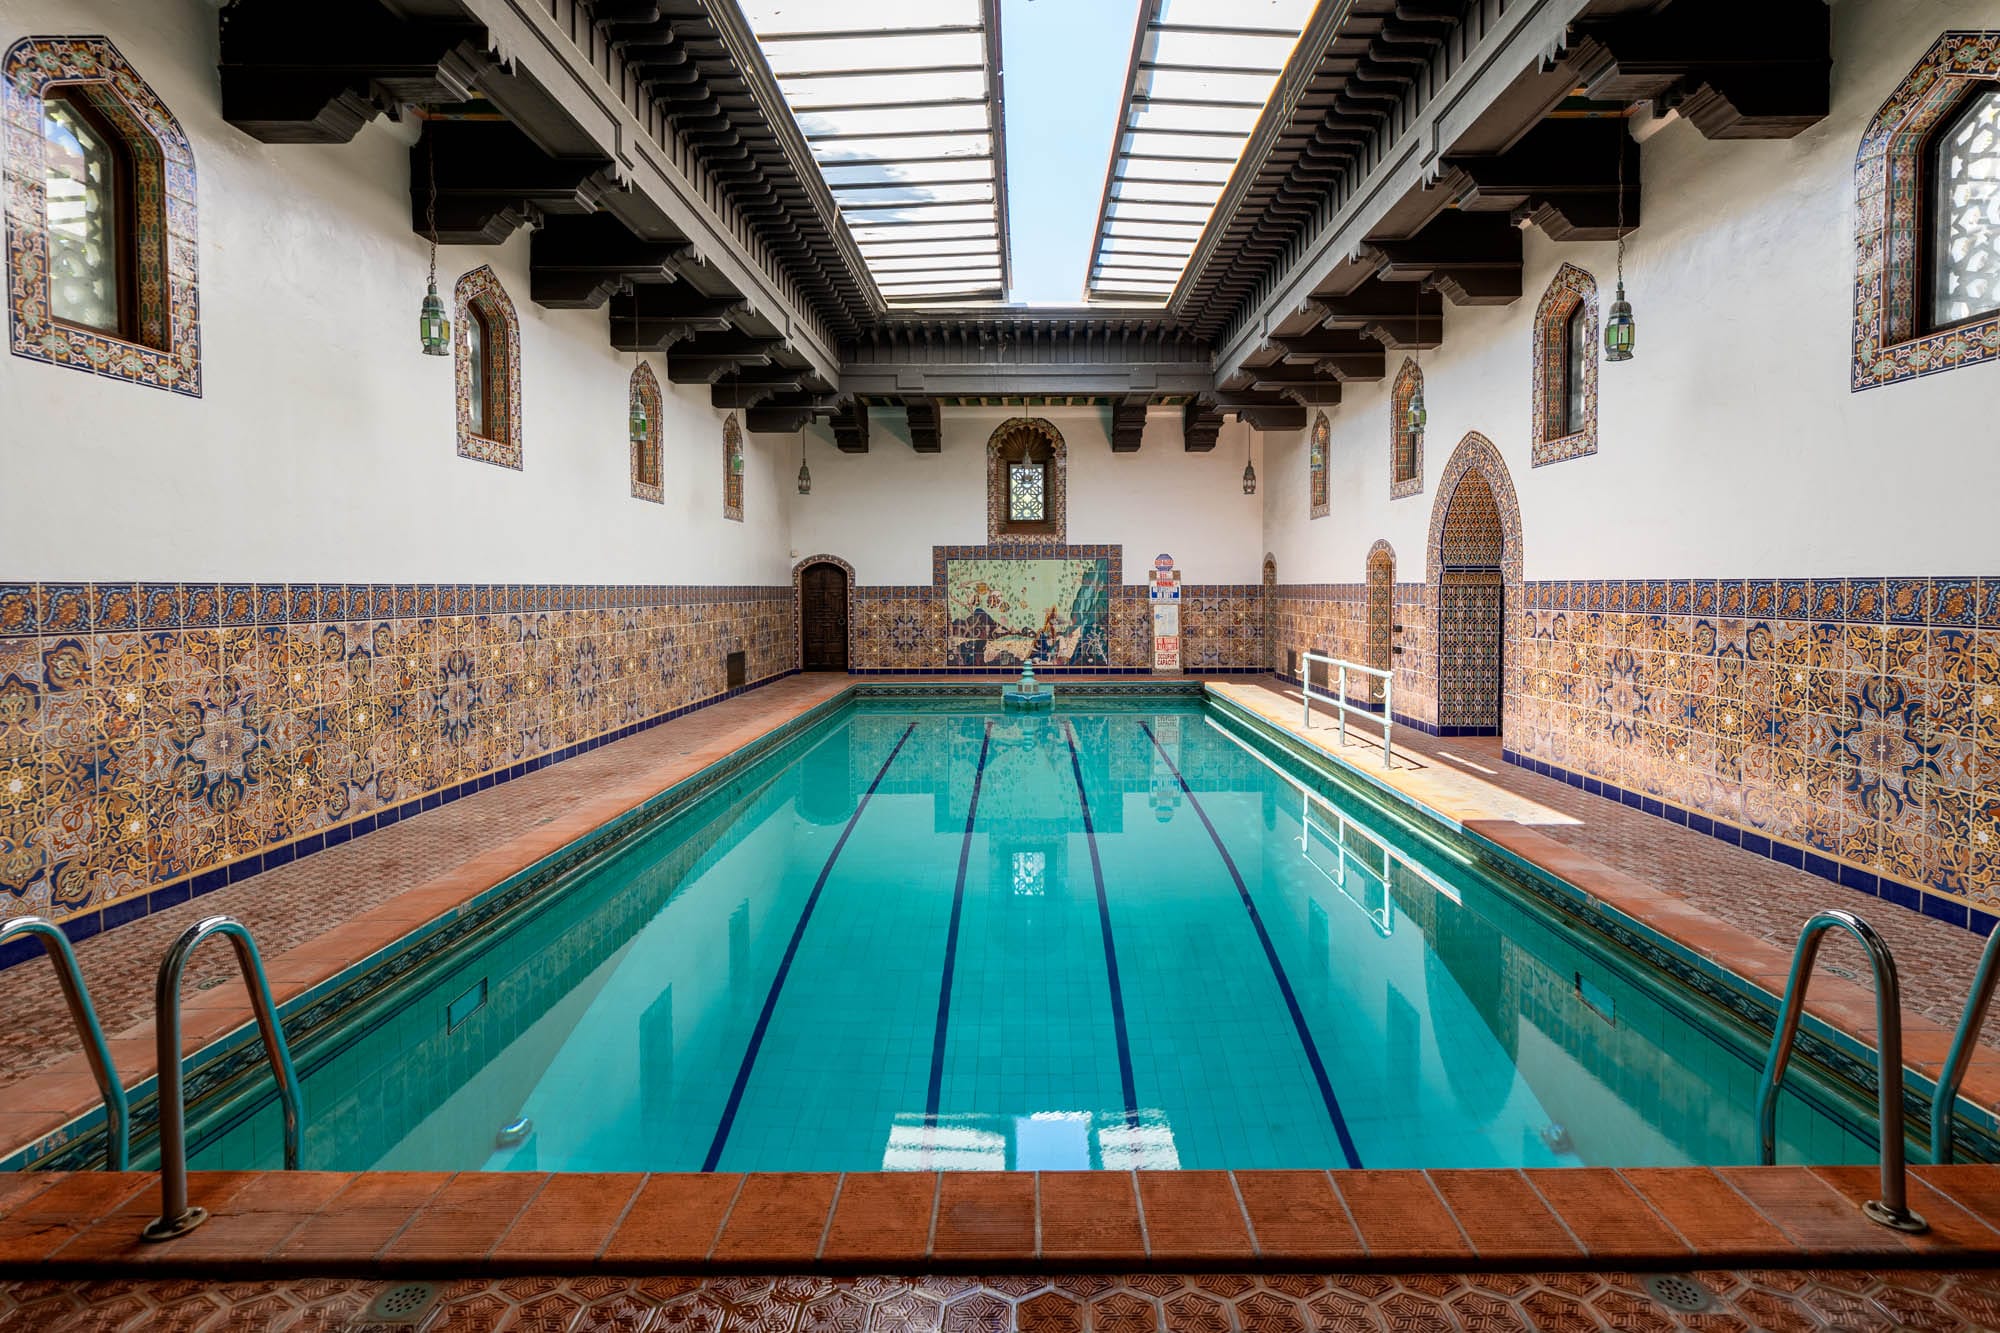 Indoor pool with huge skylight and hand painted tiles